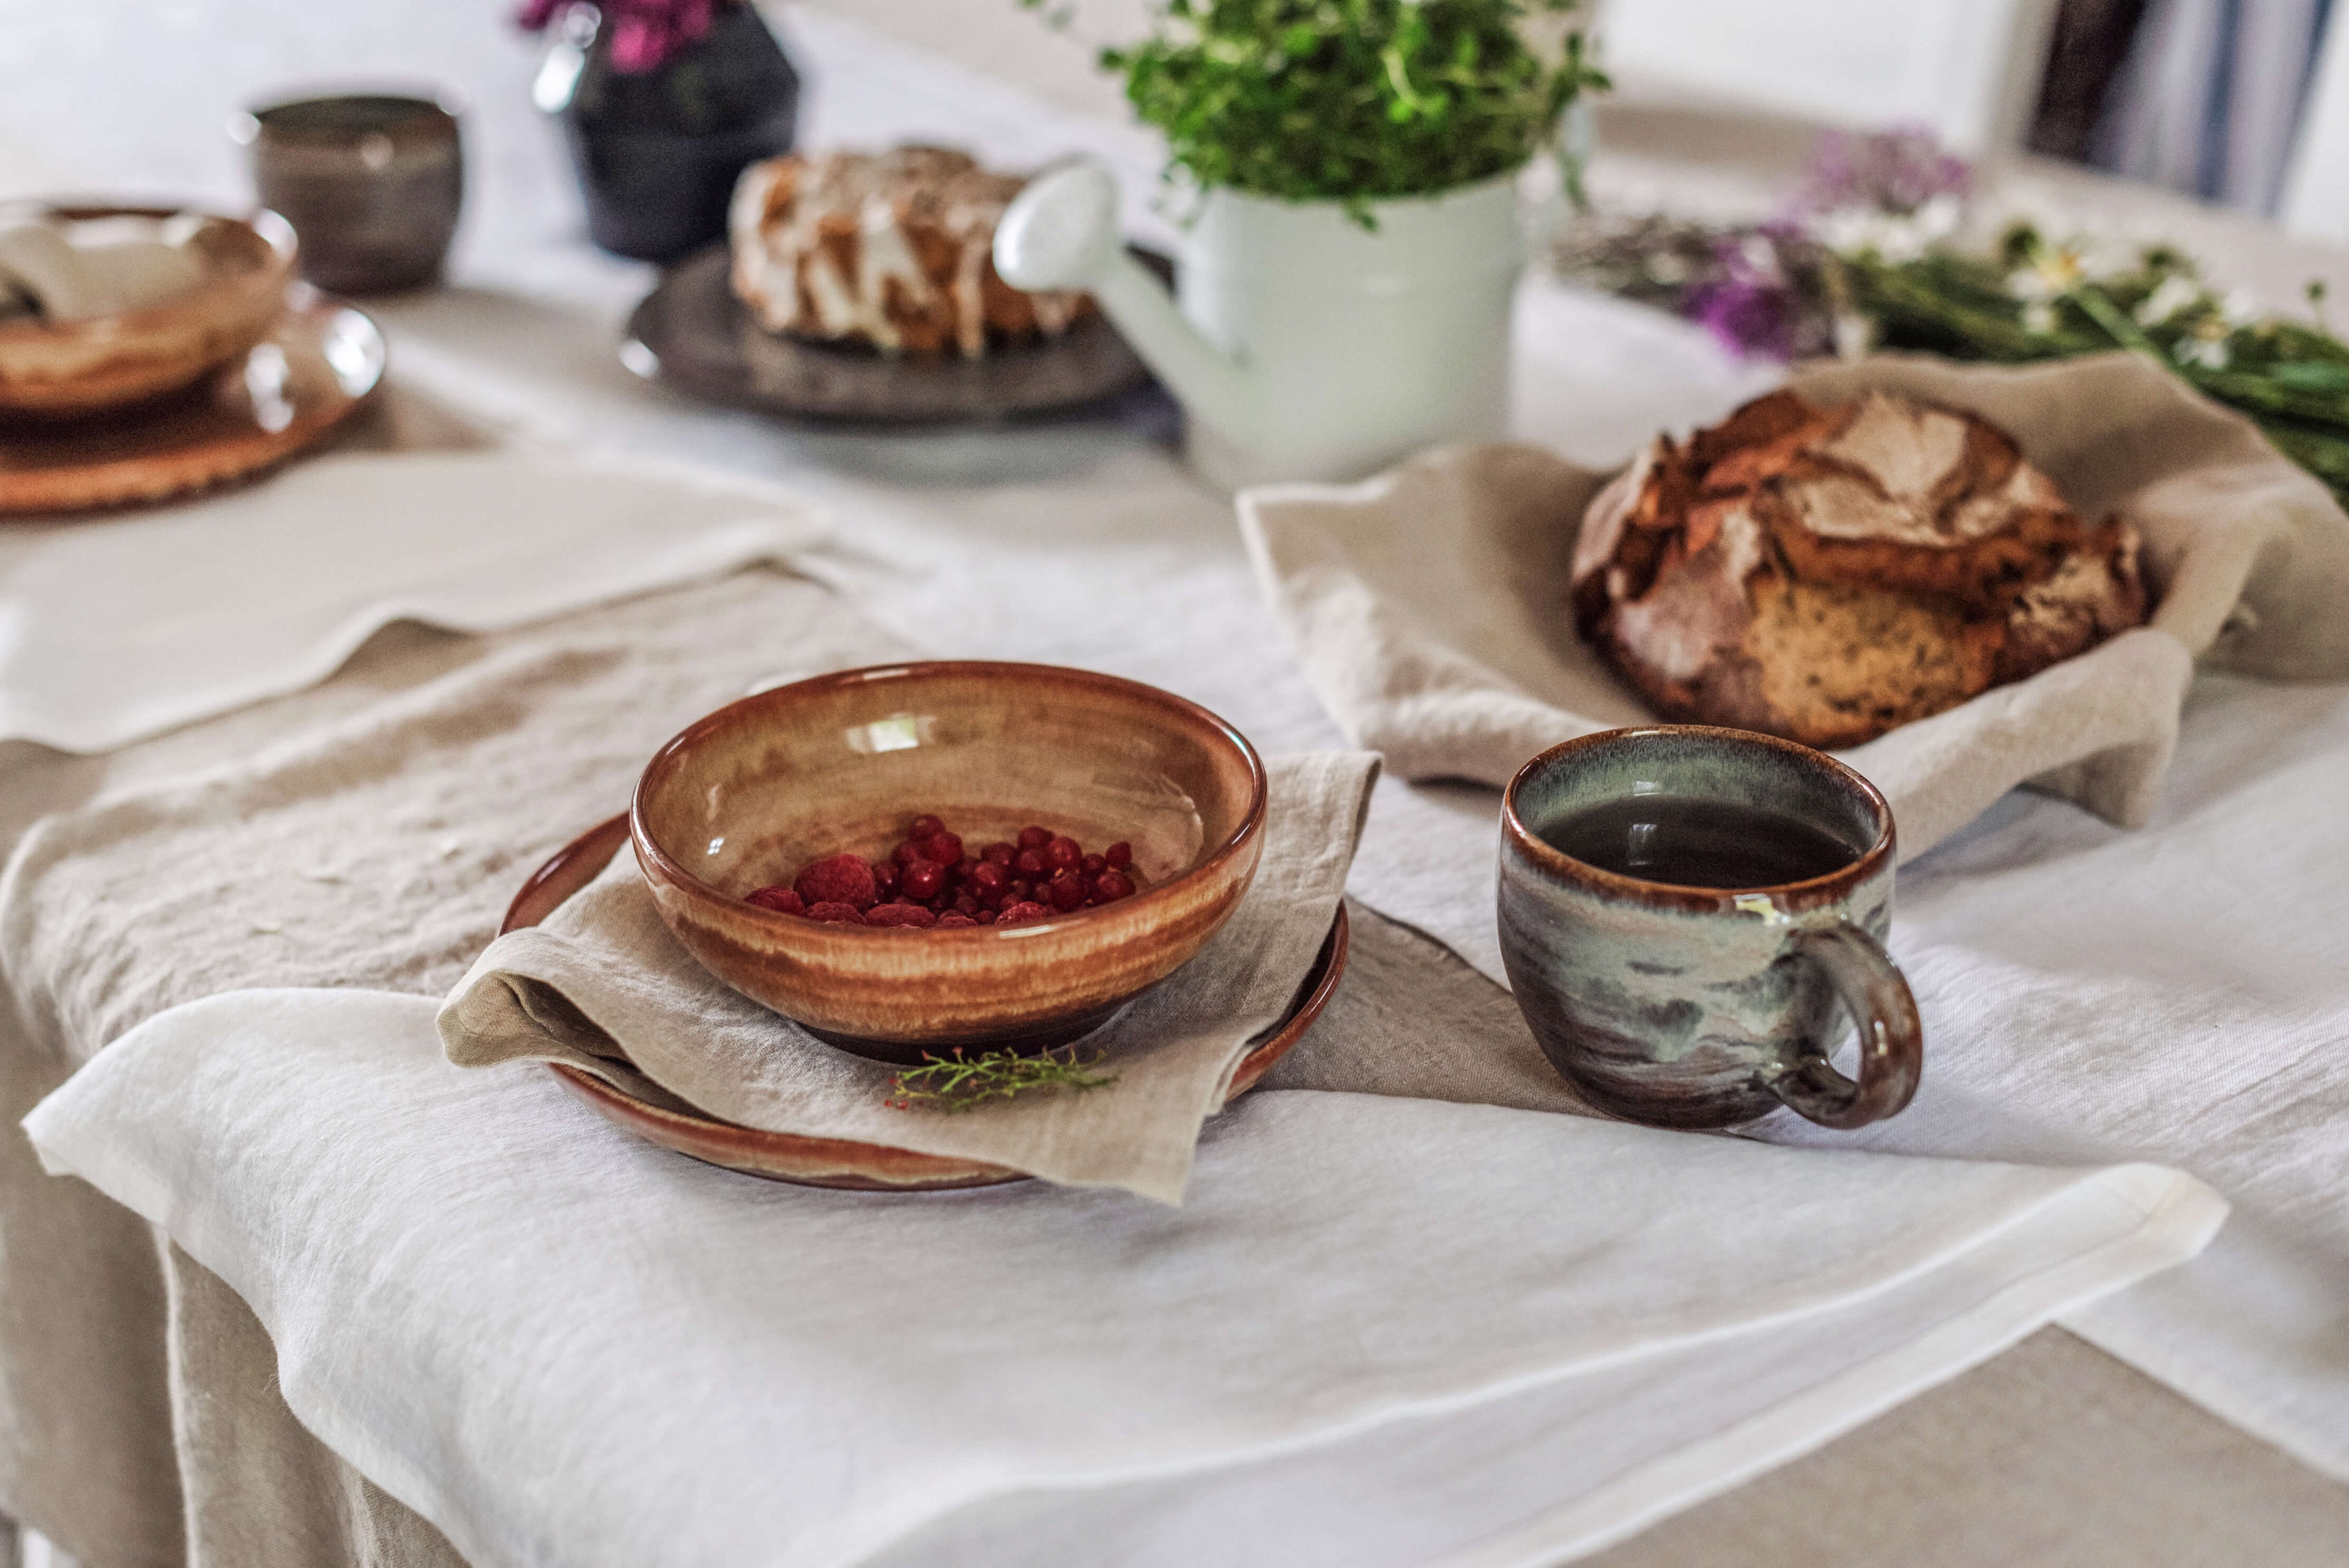 DustyLinen: The Ideal Blend of Rustic Charm and High-Quality Linen Table Products